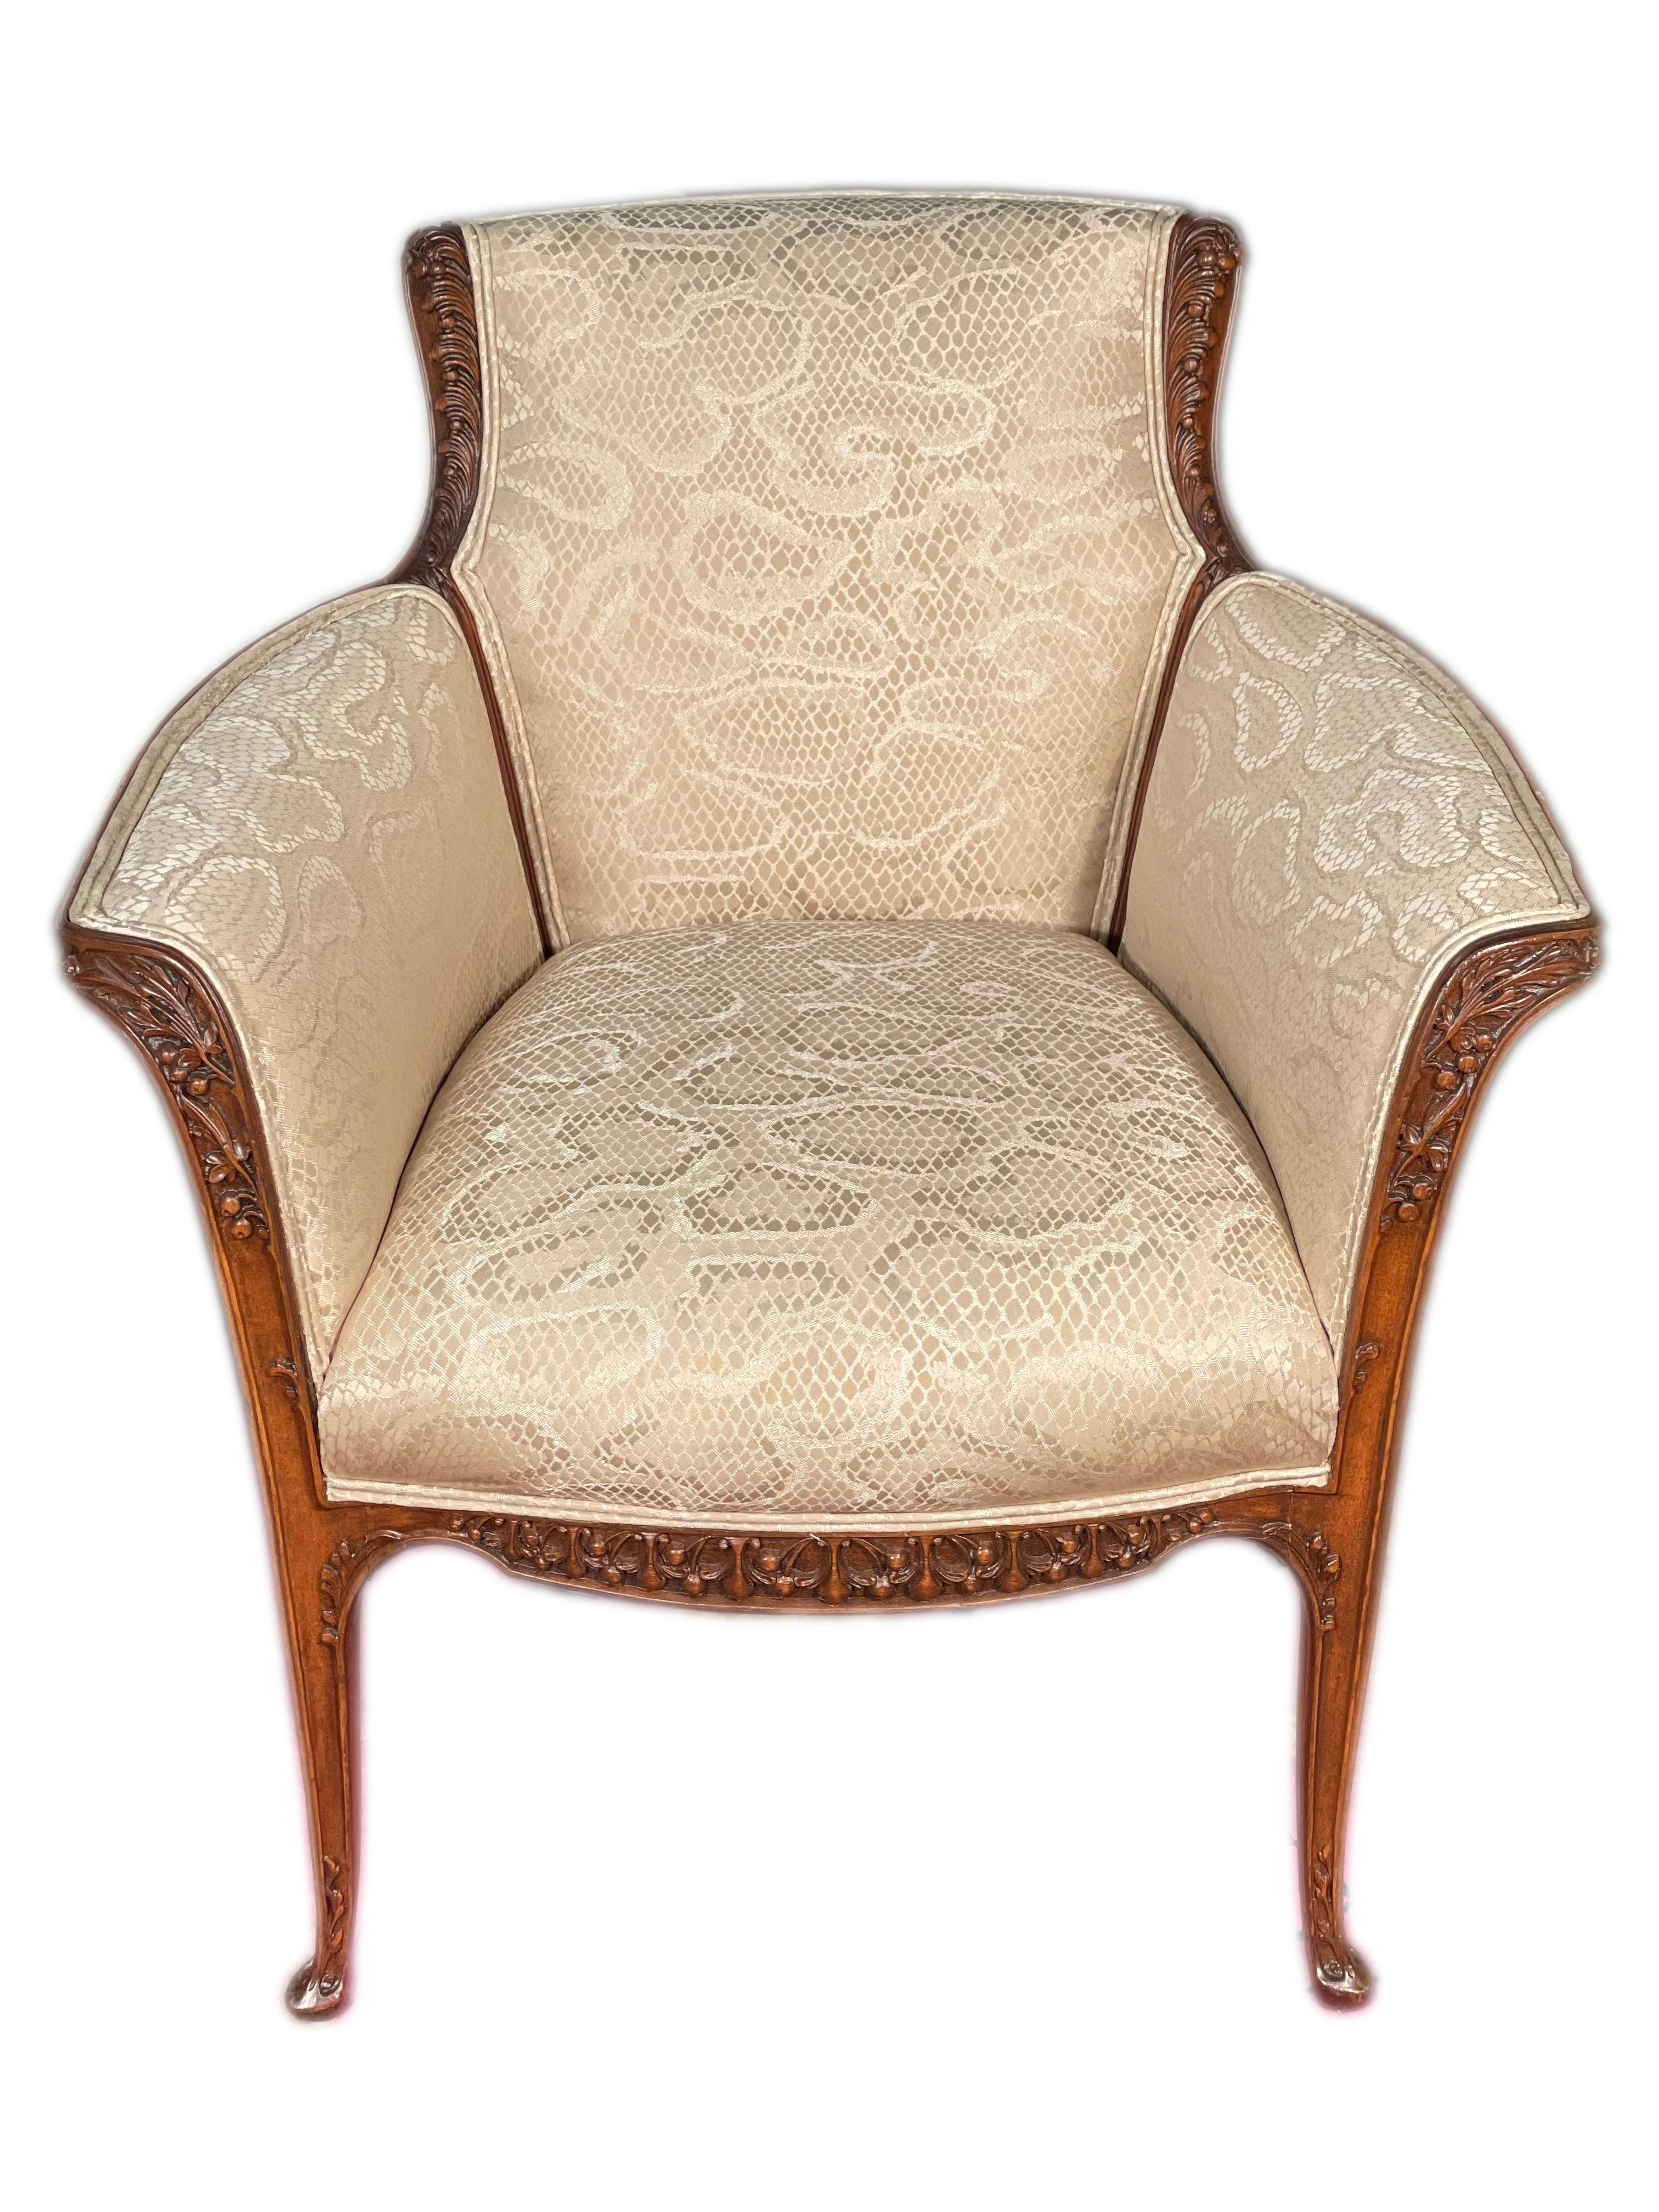 Hand-Carved Pair of French Art Nouveau Armchairs by, Louis Majorelle Arm Chairs  For Sale